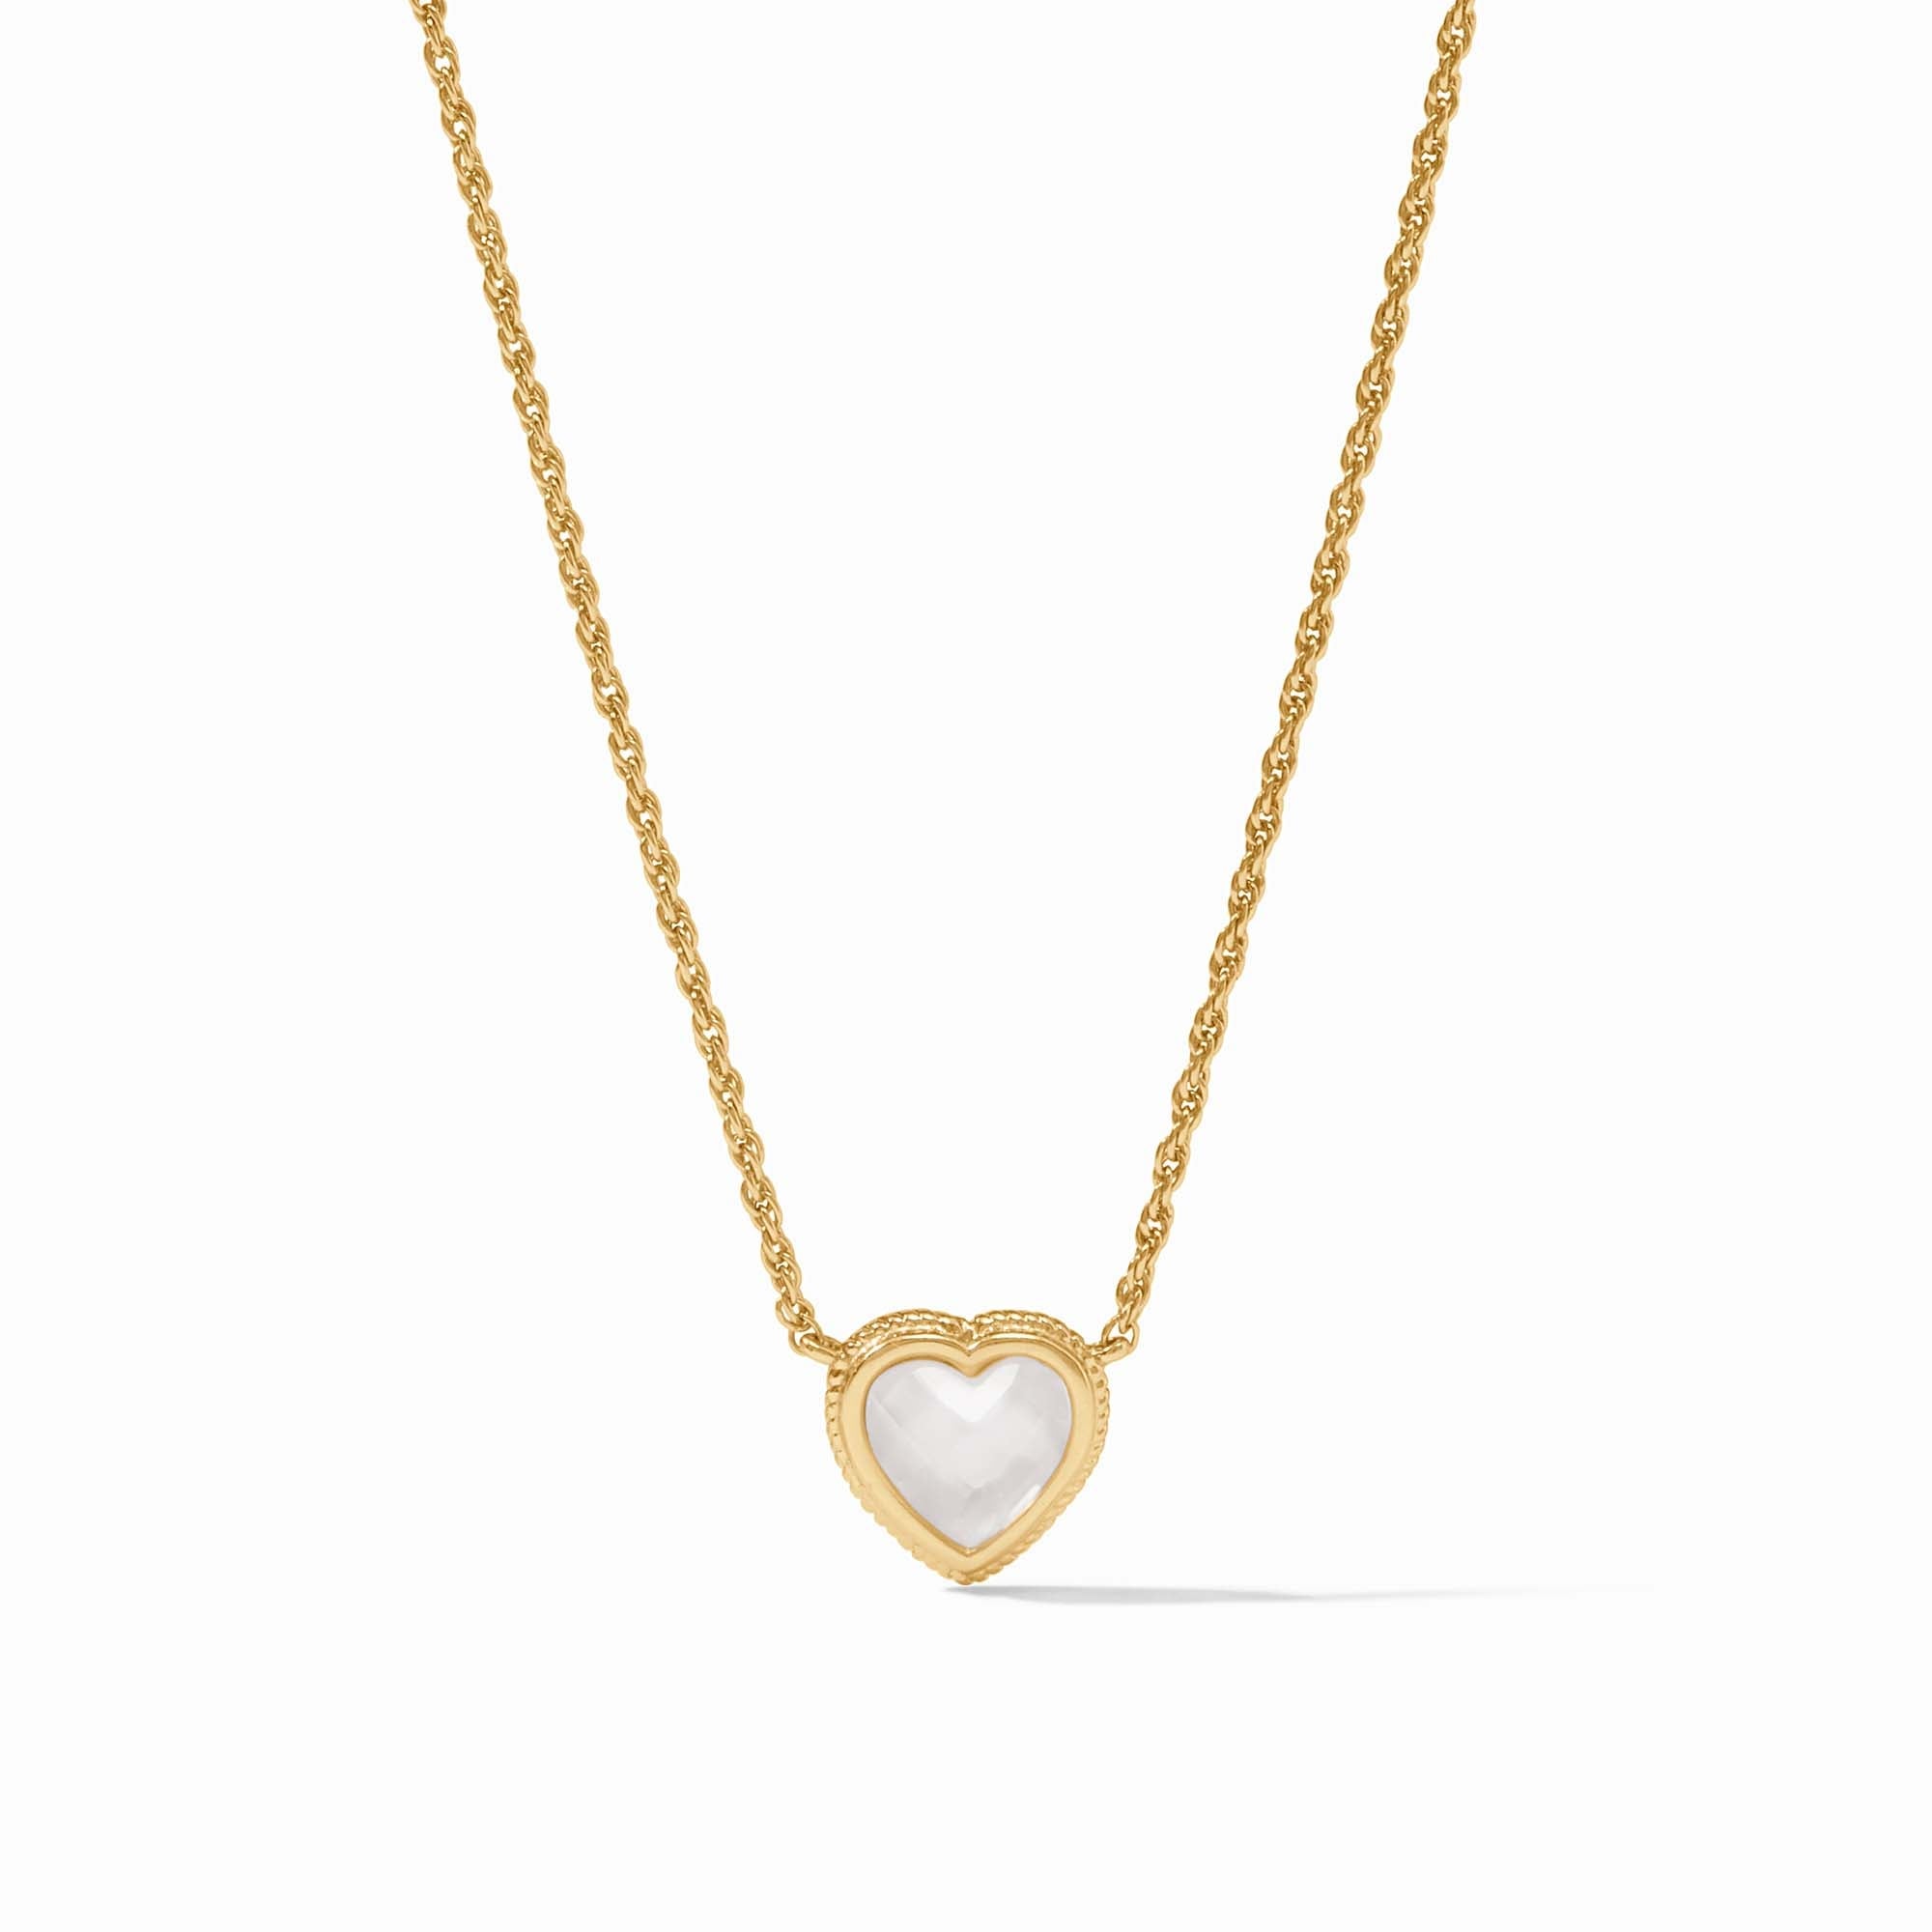 Julie Vos - Heart Delicate Necklace, Iridescent Clear Crystal